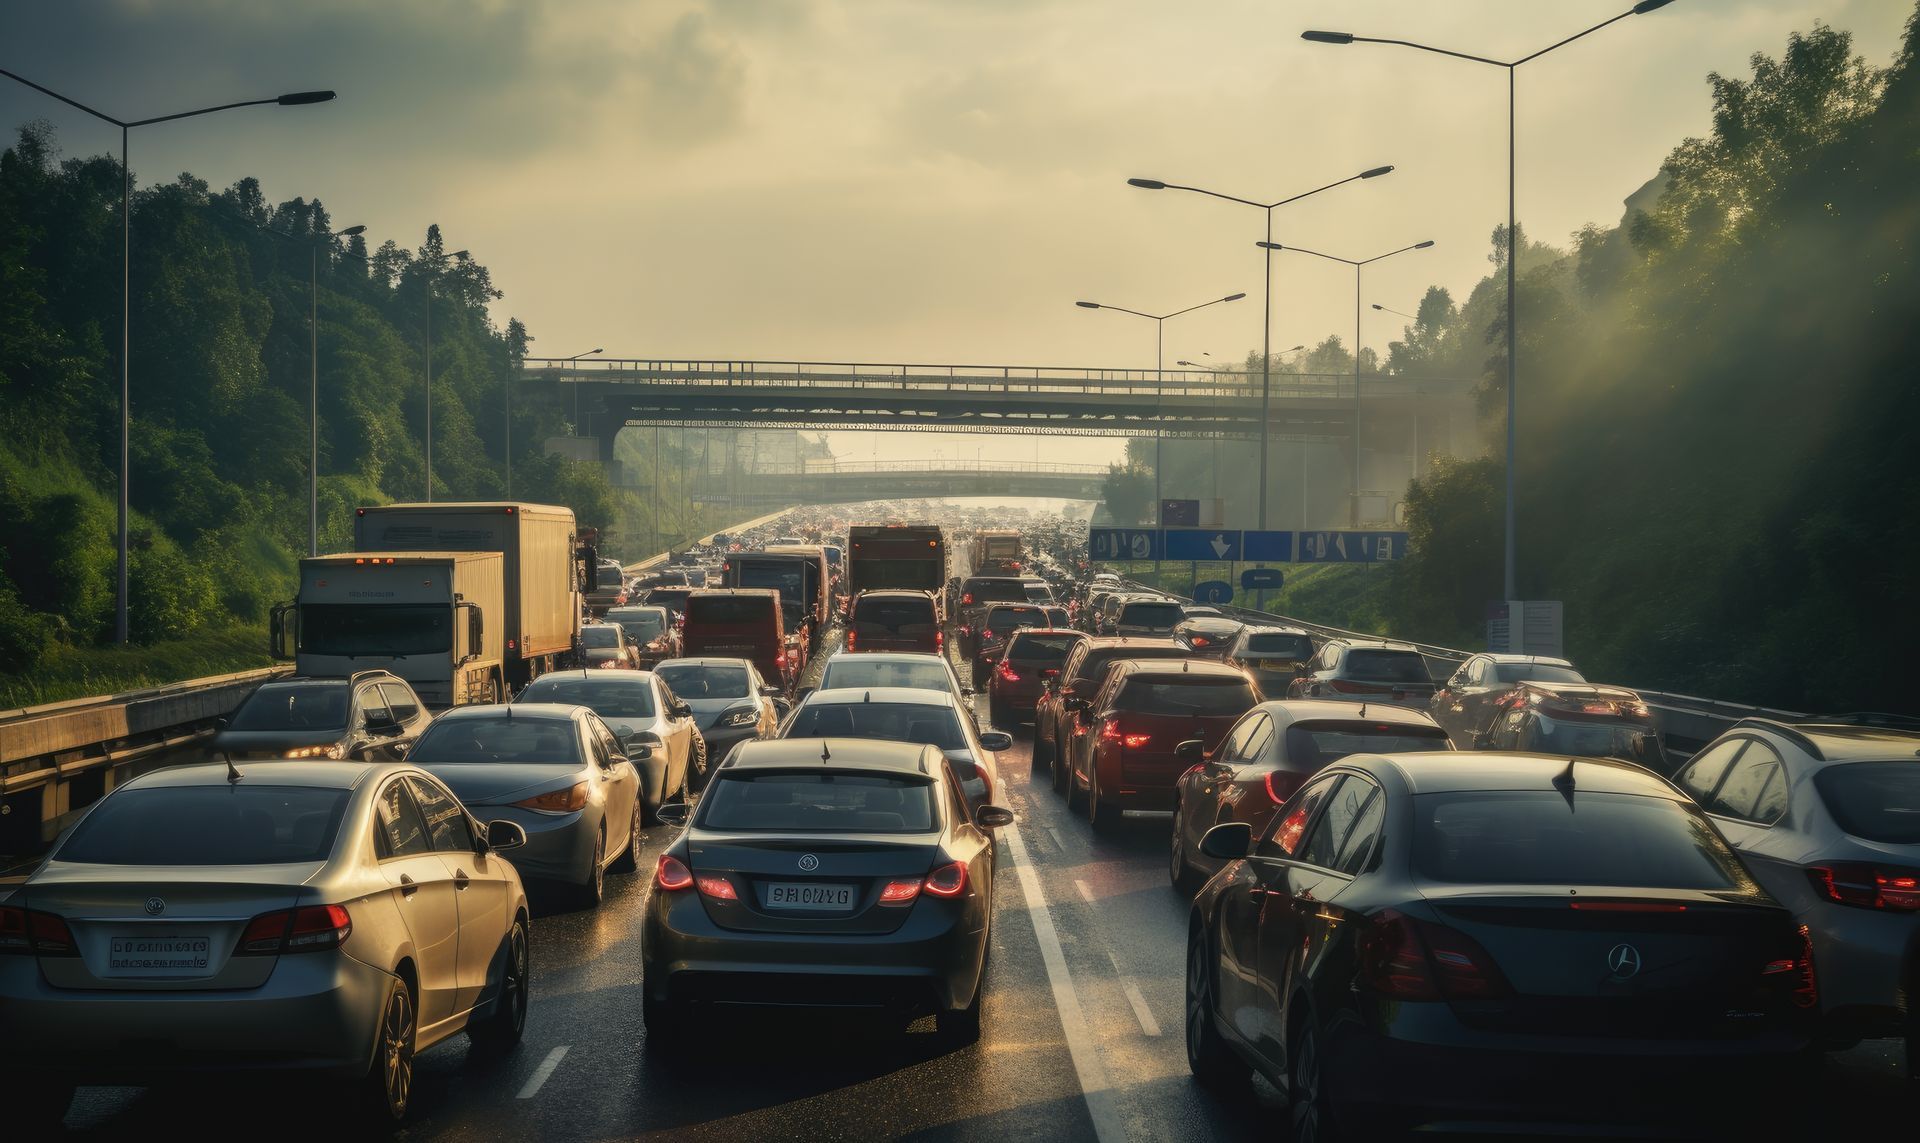 How To Drive Safe In Heavy City Traffic | Snider Automotive
